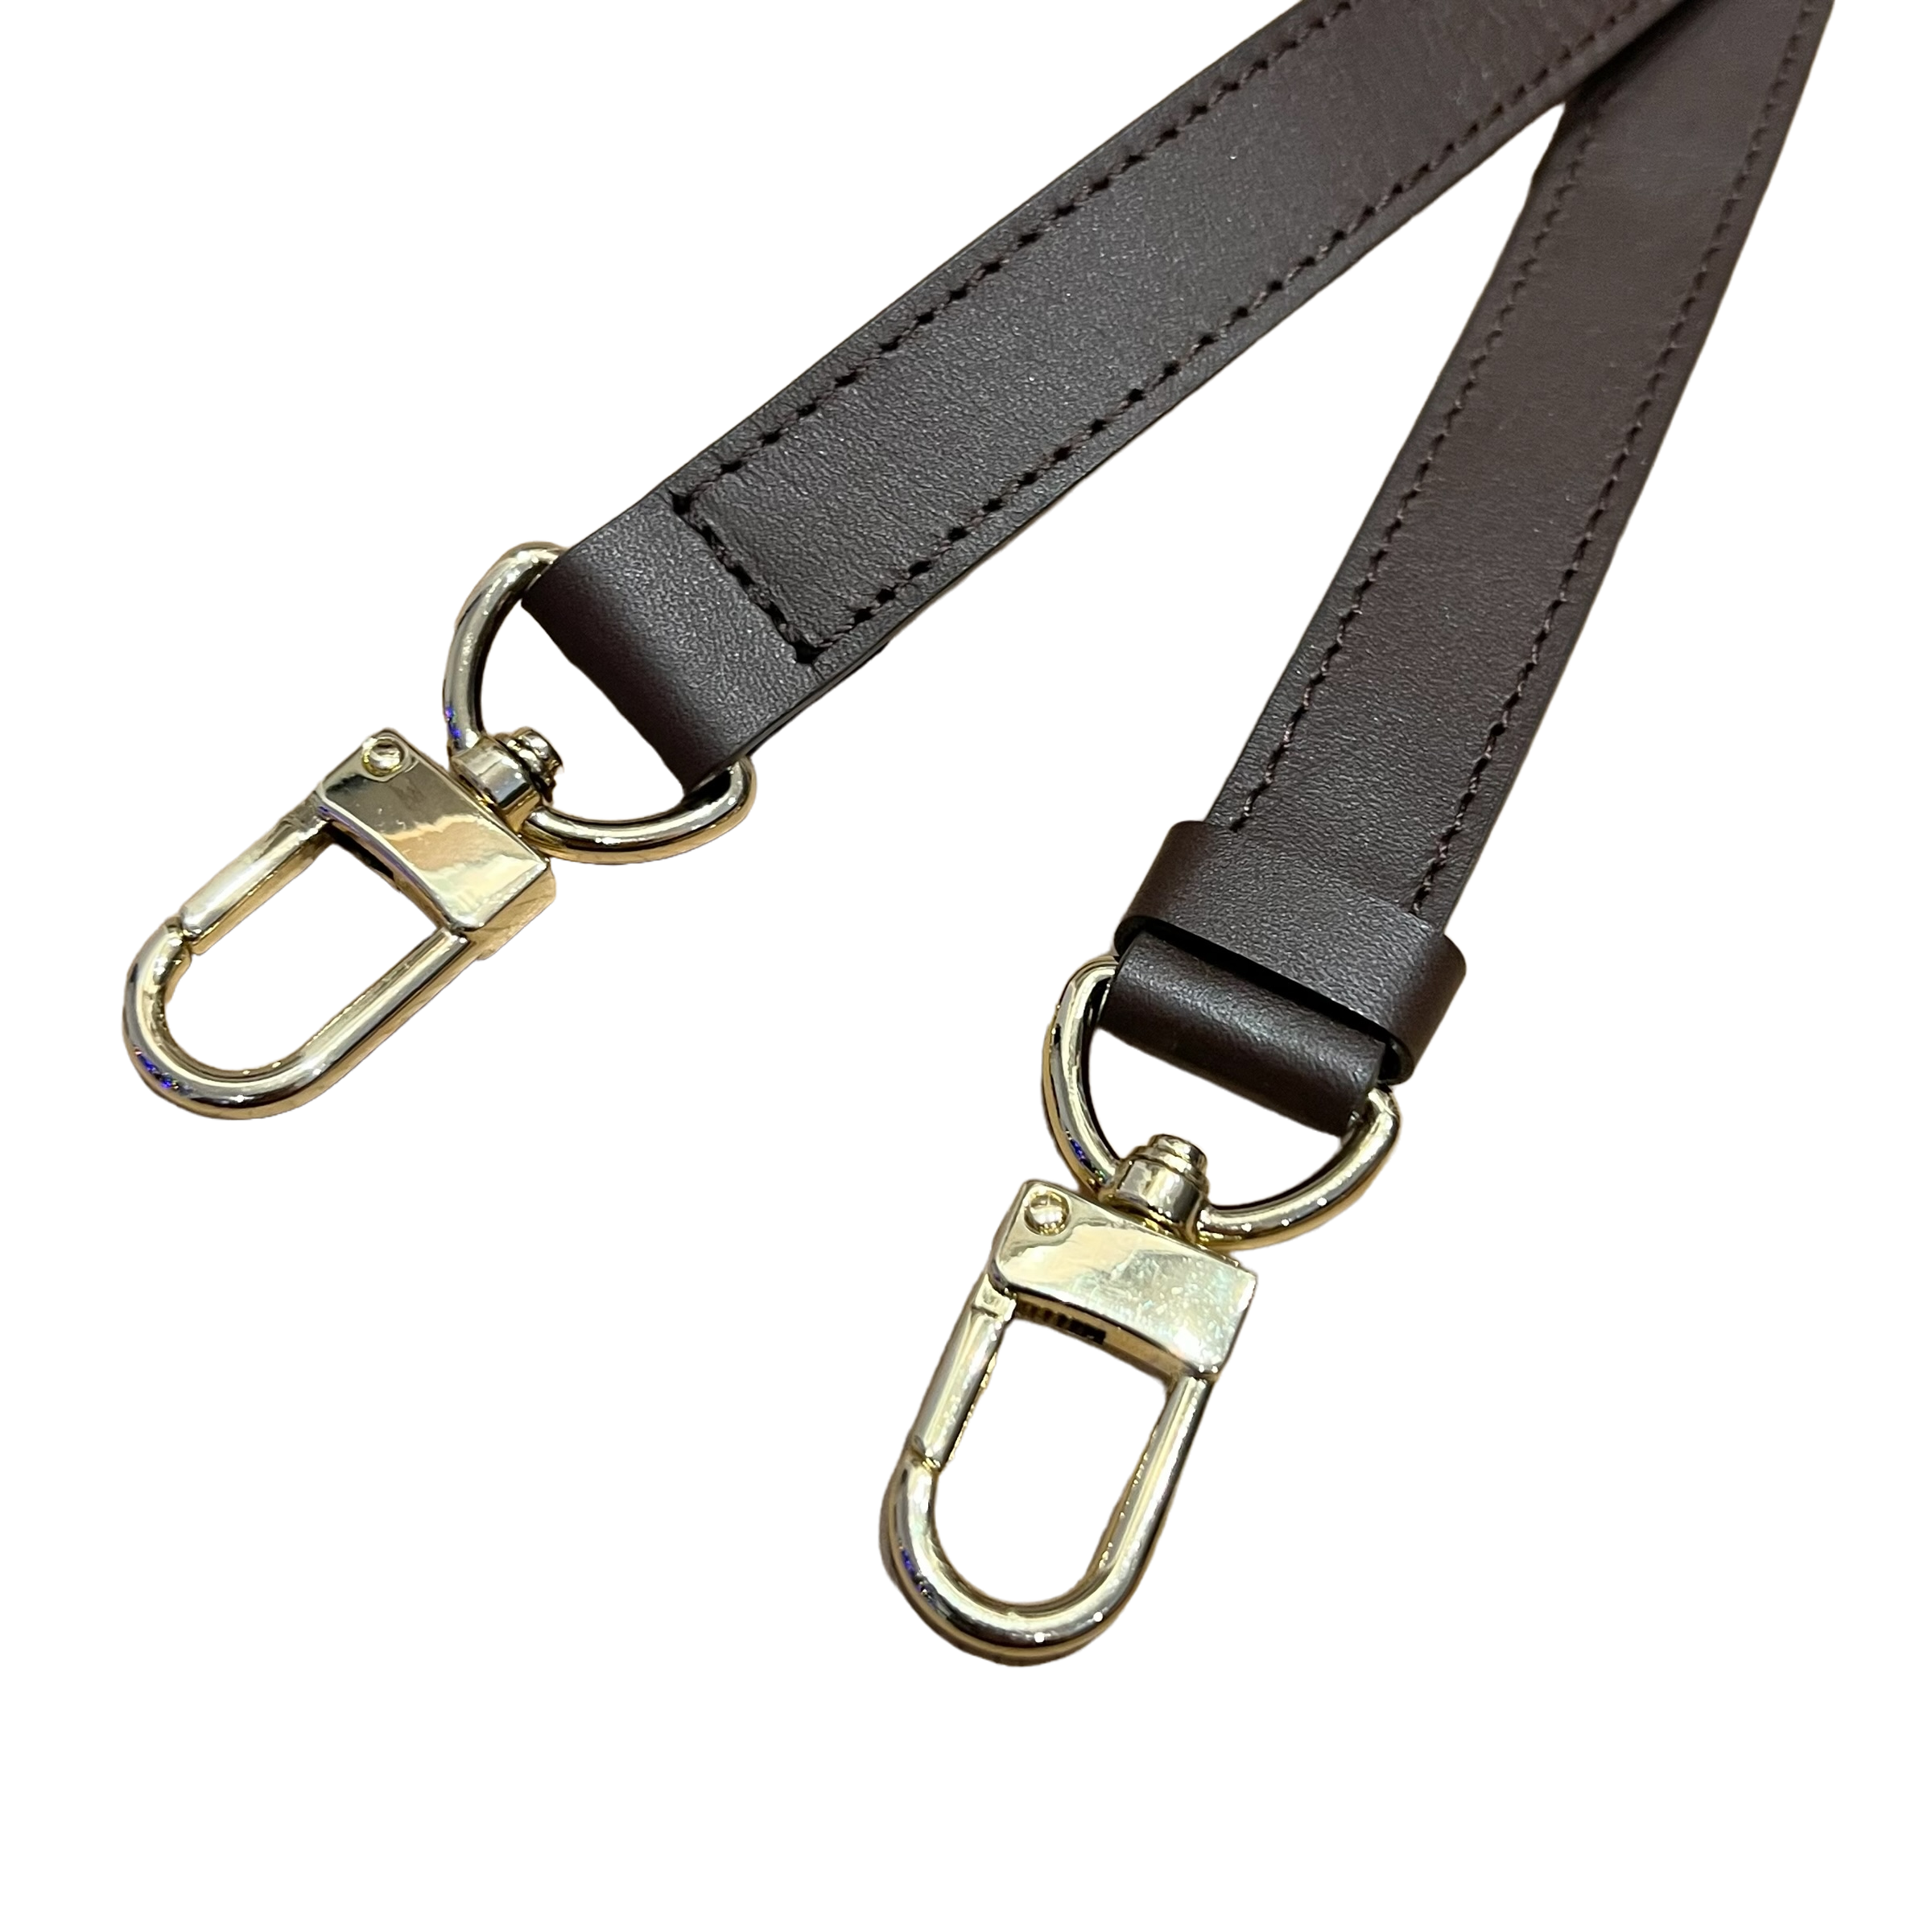 5/8" Leather Replacement Strap - Double Adjustable